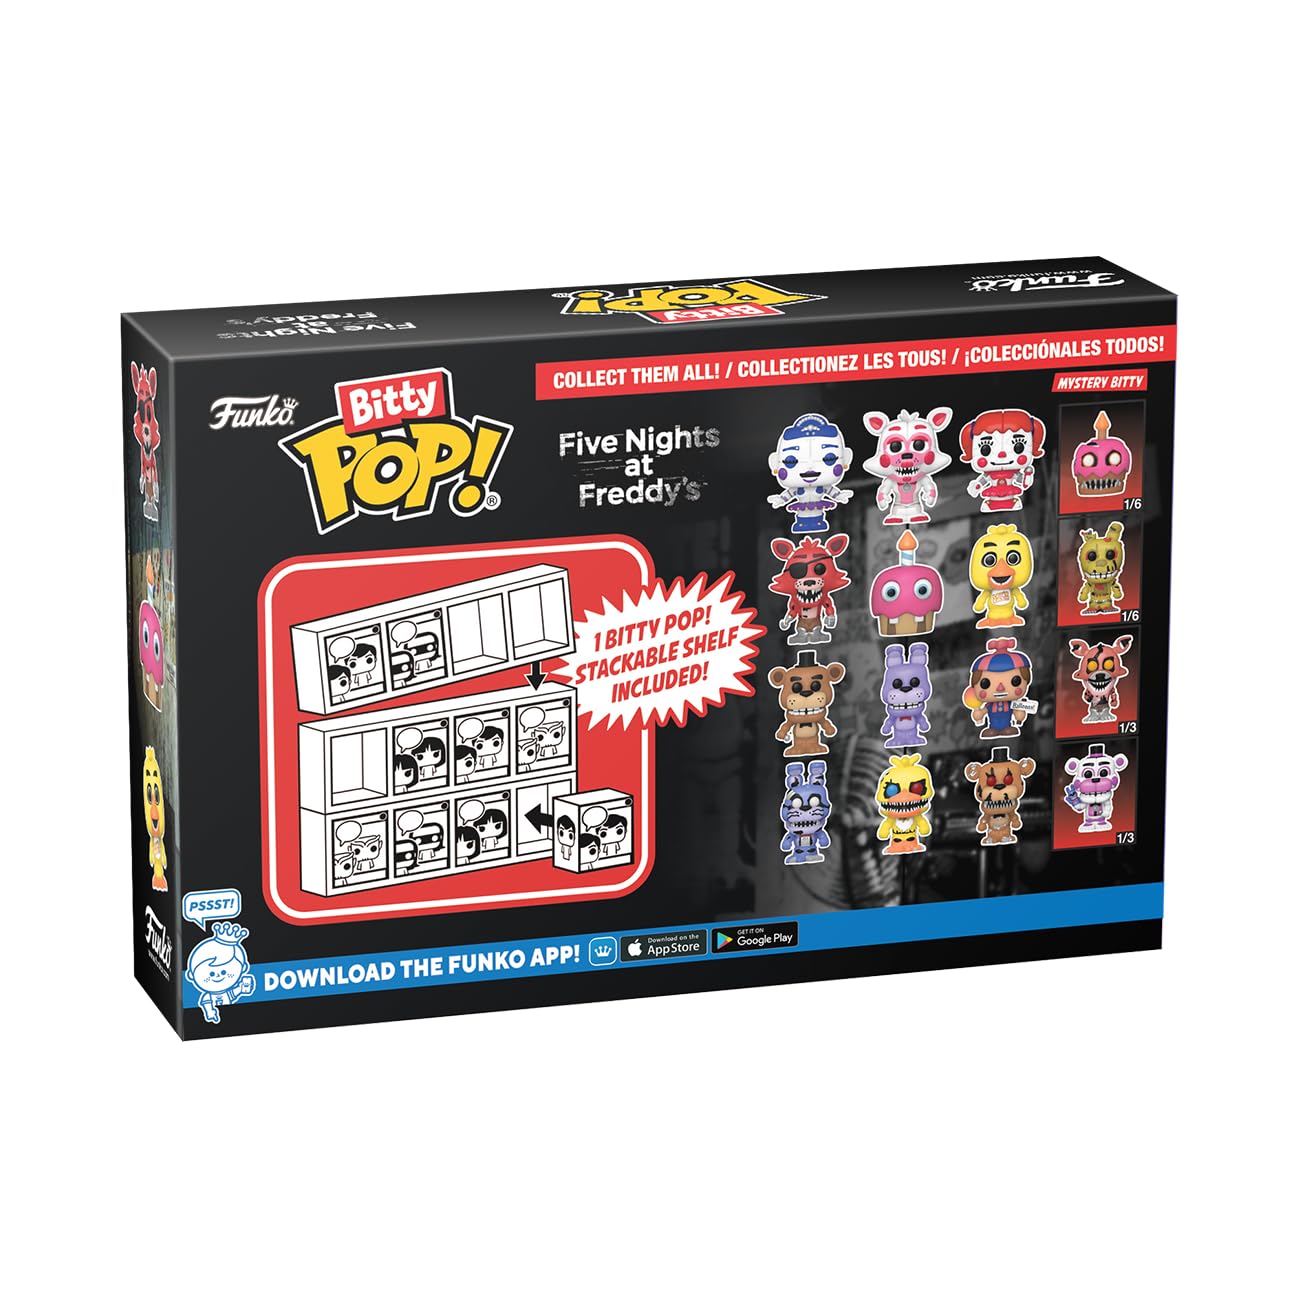 Funko Bitty Pop!: Five Nights at Freddy's Mini Collectible Toys 4-Pack - Ballora, Funtime Foxy, Baby & Mystery Chase Figure (Styles May Vary) - amzGamess